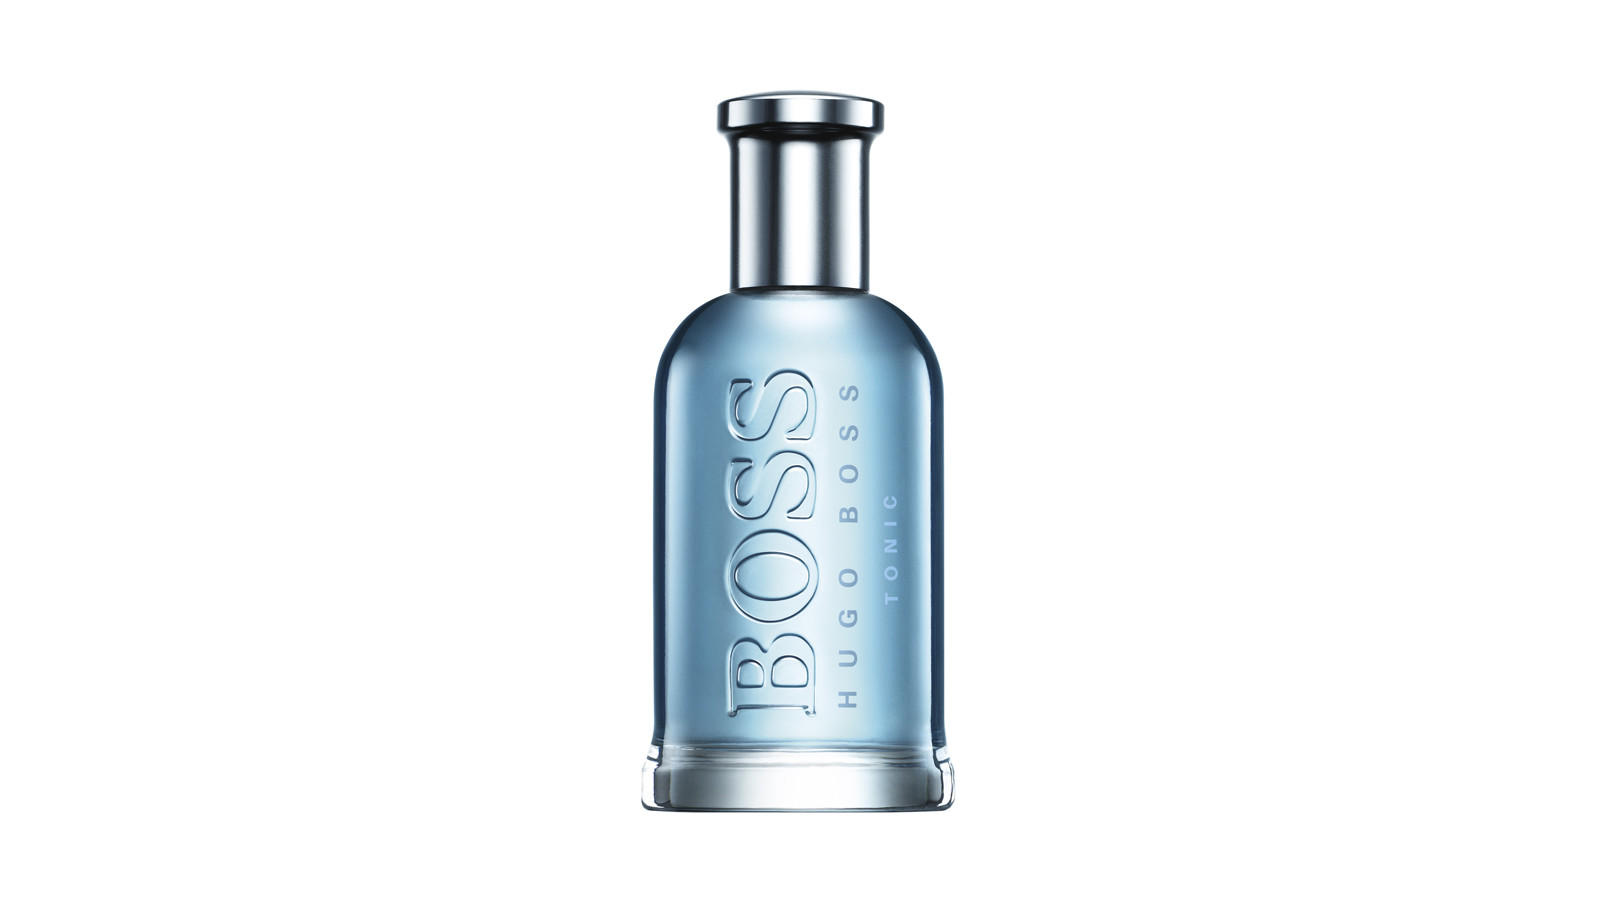 Boss Bottled Tonic ($70 to $119), the newest fragrance in the Boss Bottled portfolio — and the first "fresh" scent in the lineup.